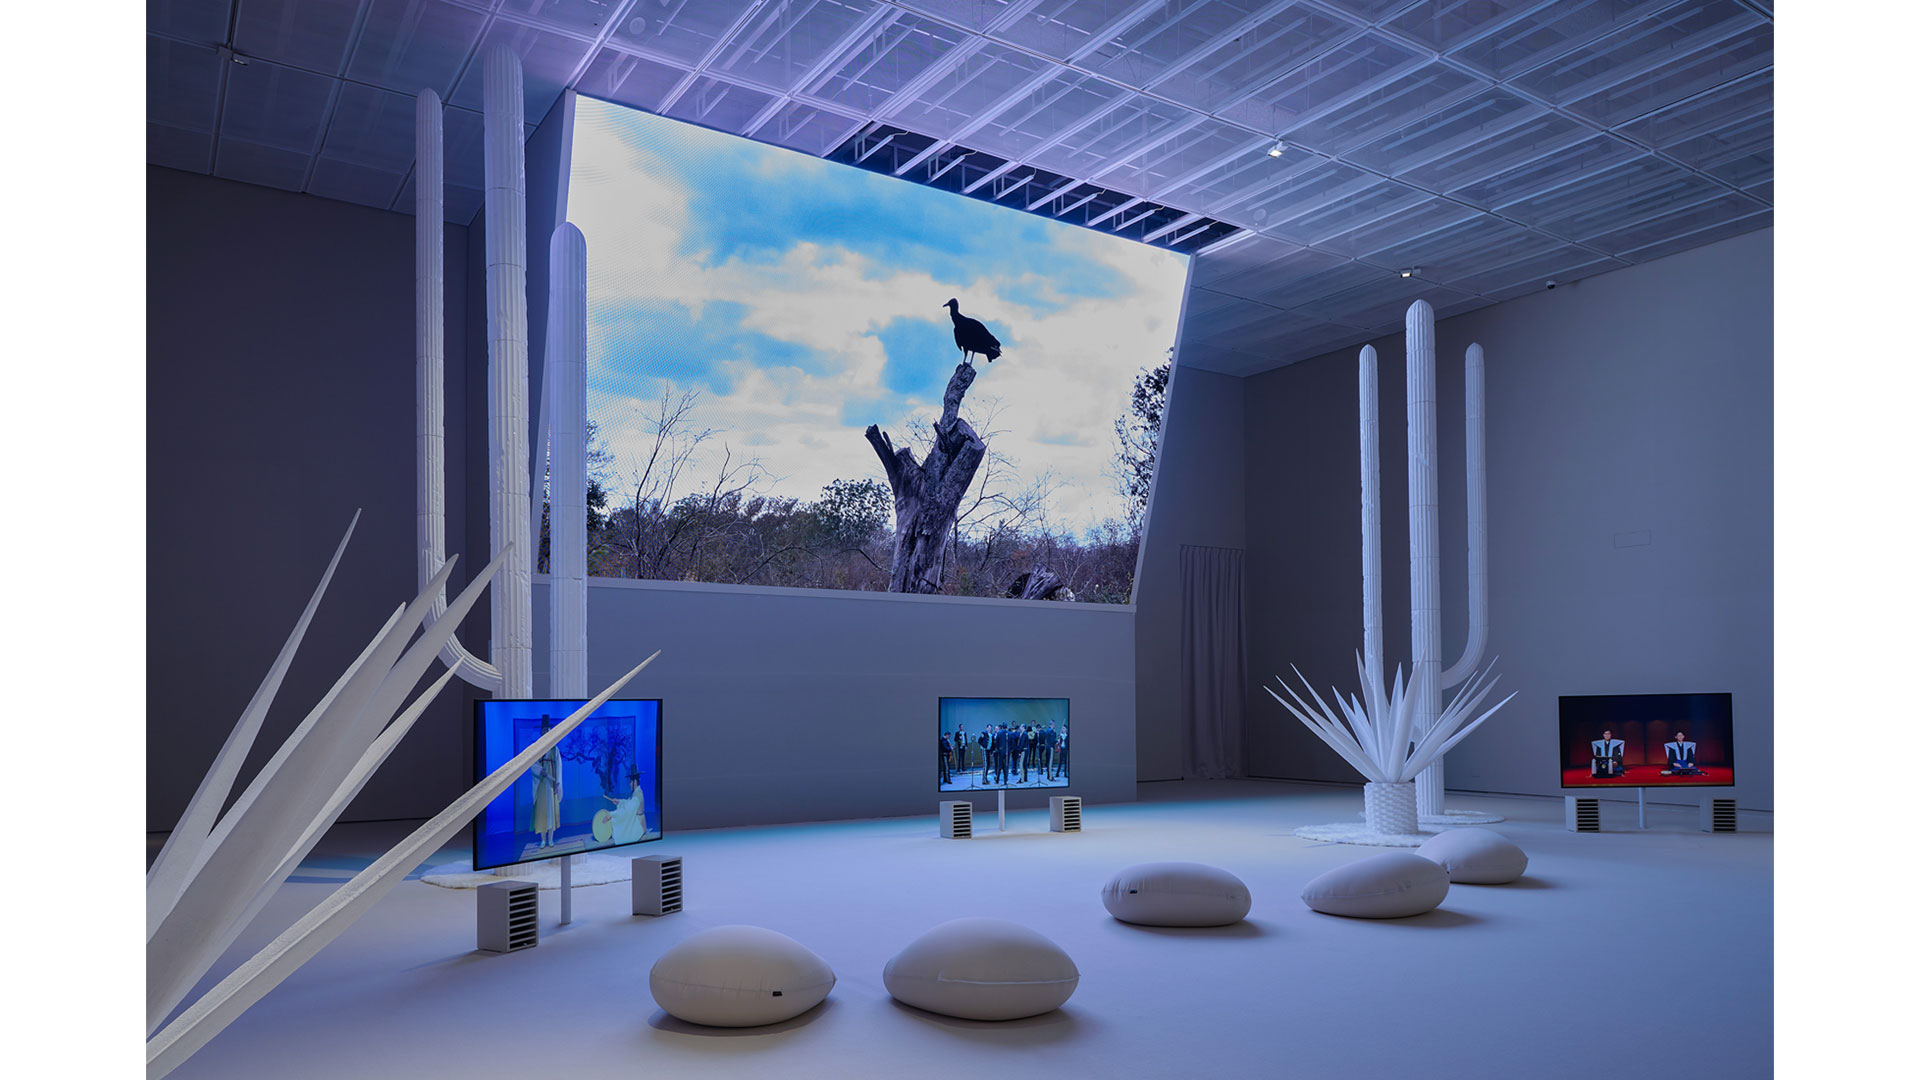 Jung Yeondoo, One Hundred Years of Travels, 2023, video installation, four-channel HD digital video, color, sound, mixed media, 48 min., dimension variable. Installation view. Courtesy of artist. Photograph by sonongji.